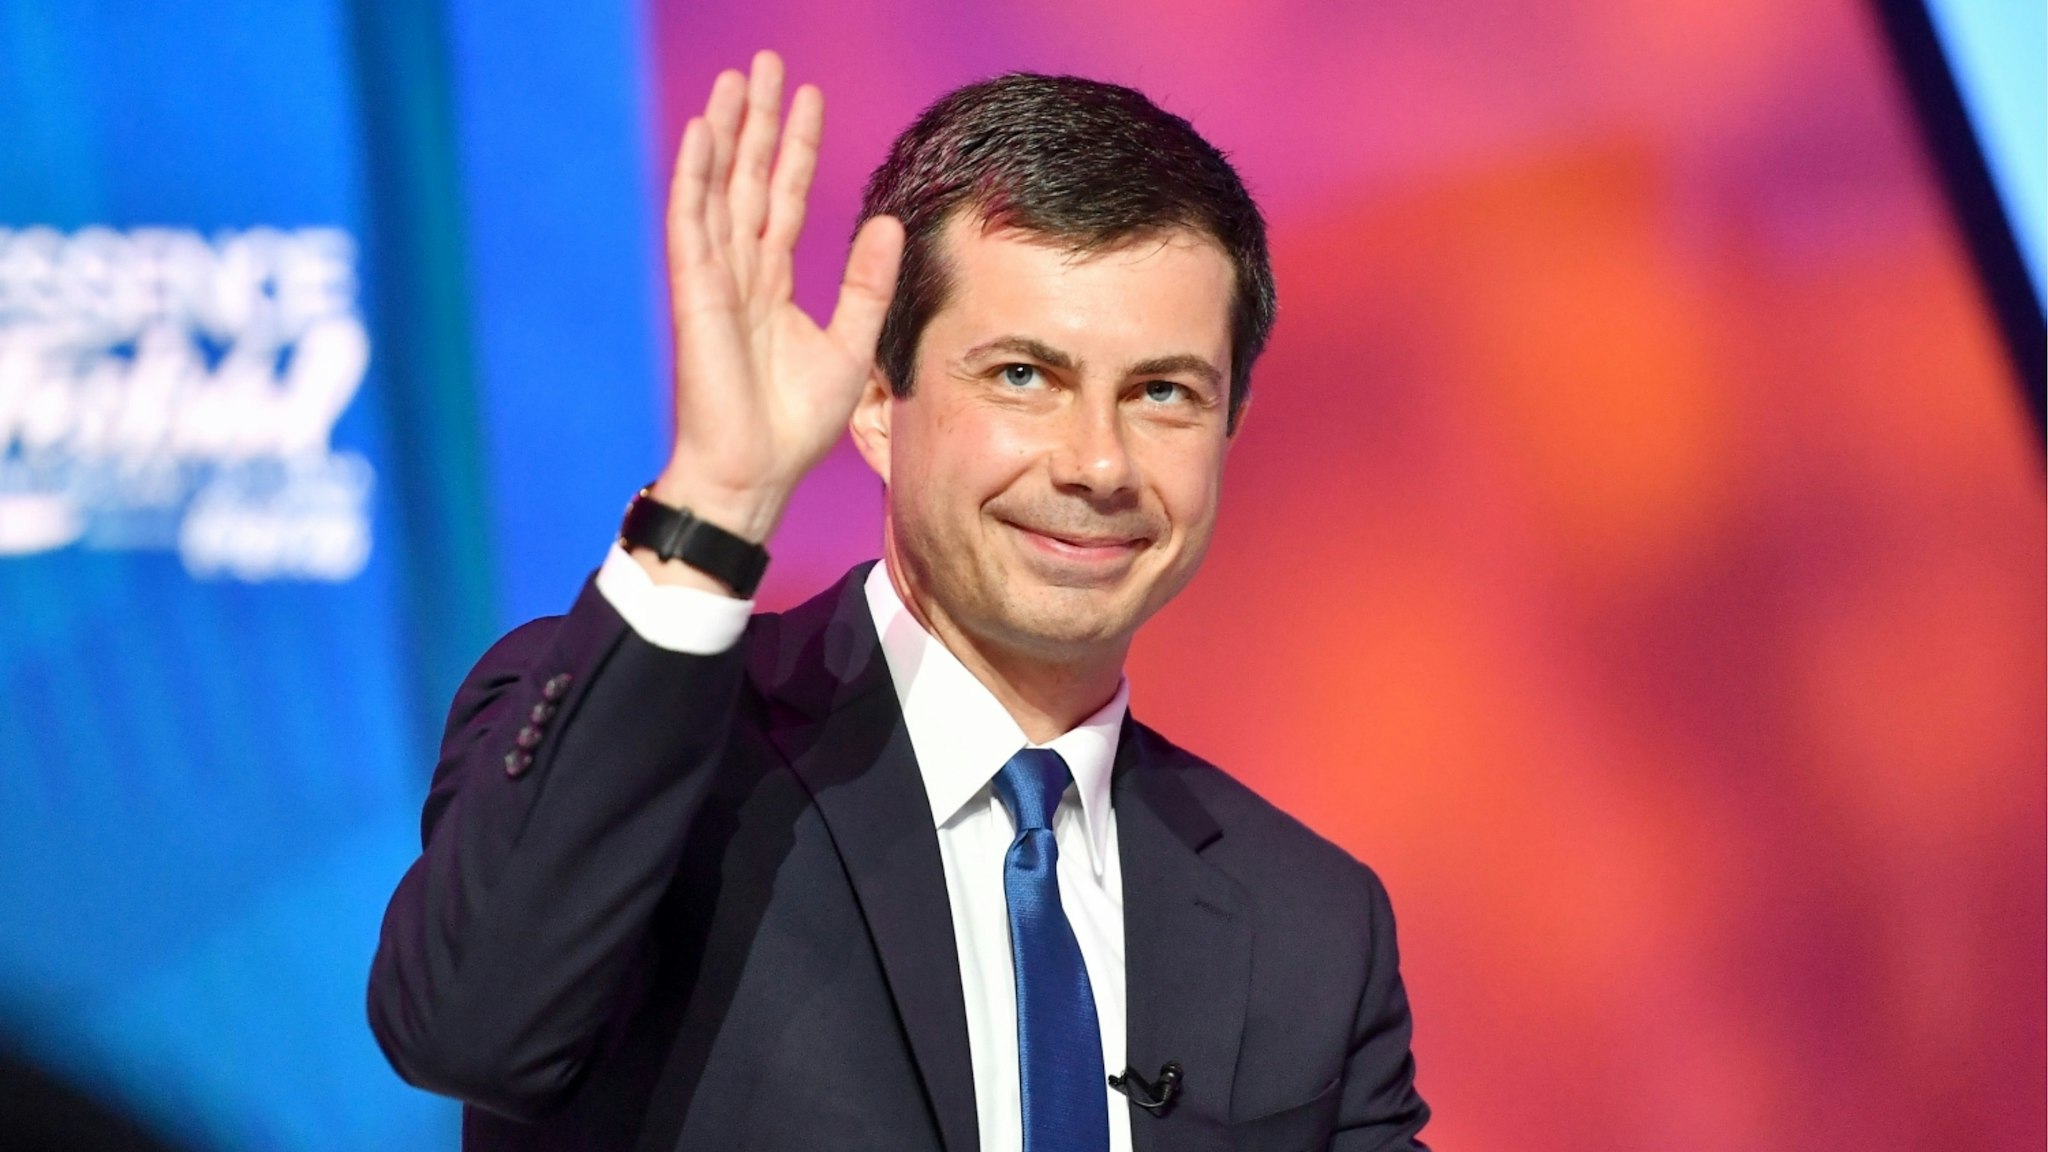 Mayor Pete Buttigieg speaks on stage at 2019 ESSENCE Festival Presented By Coca-Cola at Ernest N. Morial Convention Center on July 07, 2019 in New Orleans, Louisiana.